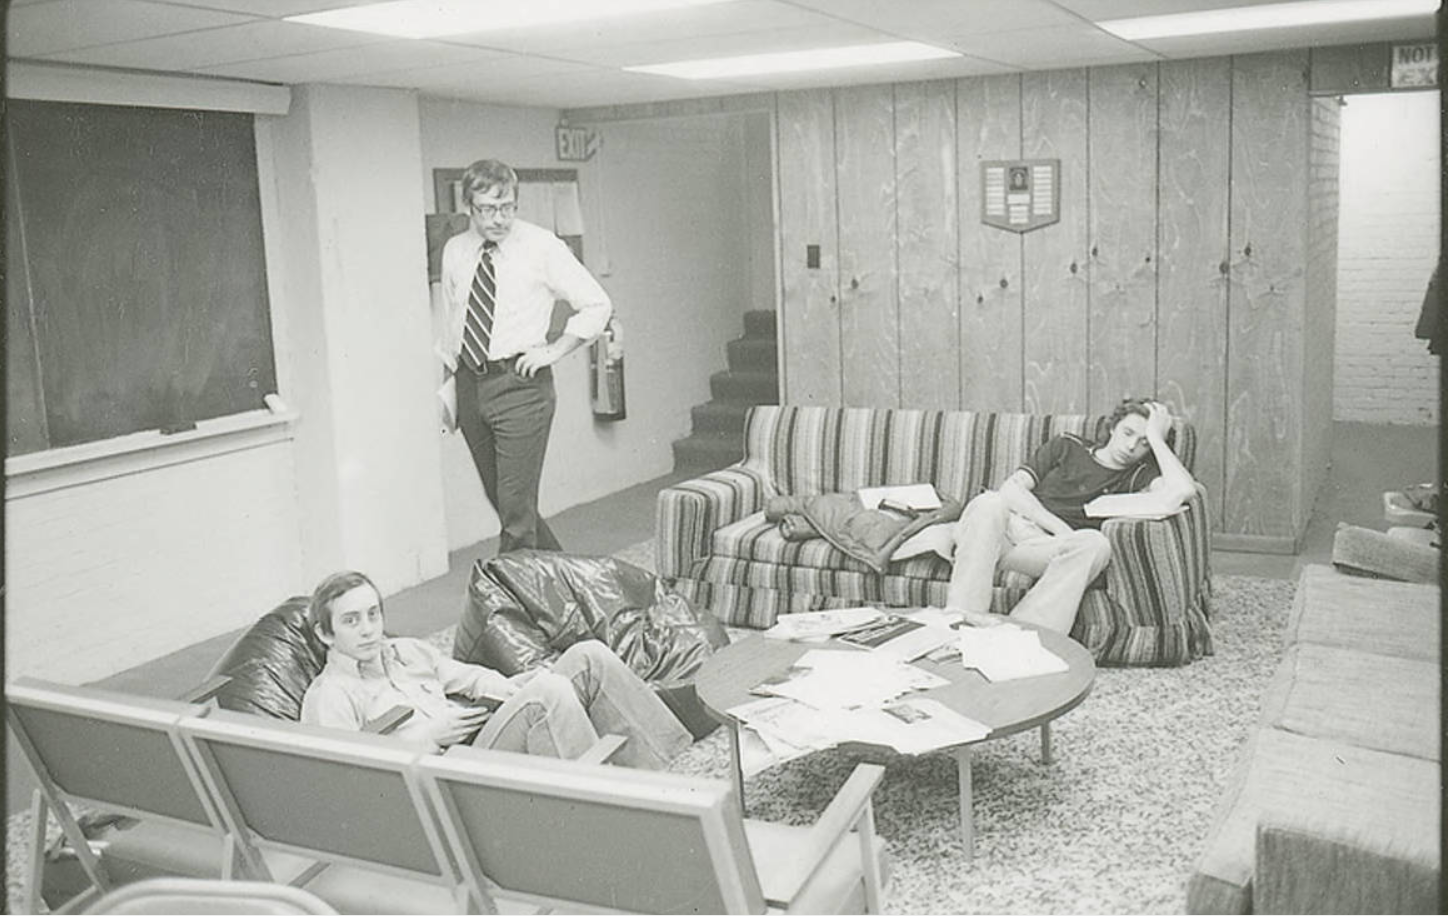 Black and white image of students studying